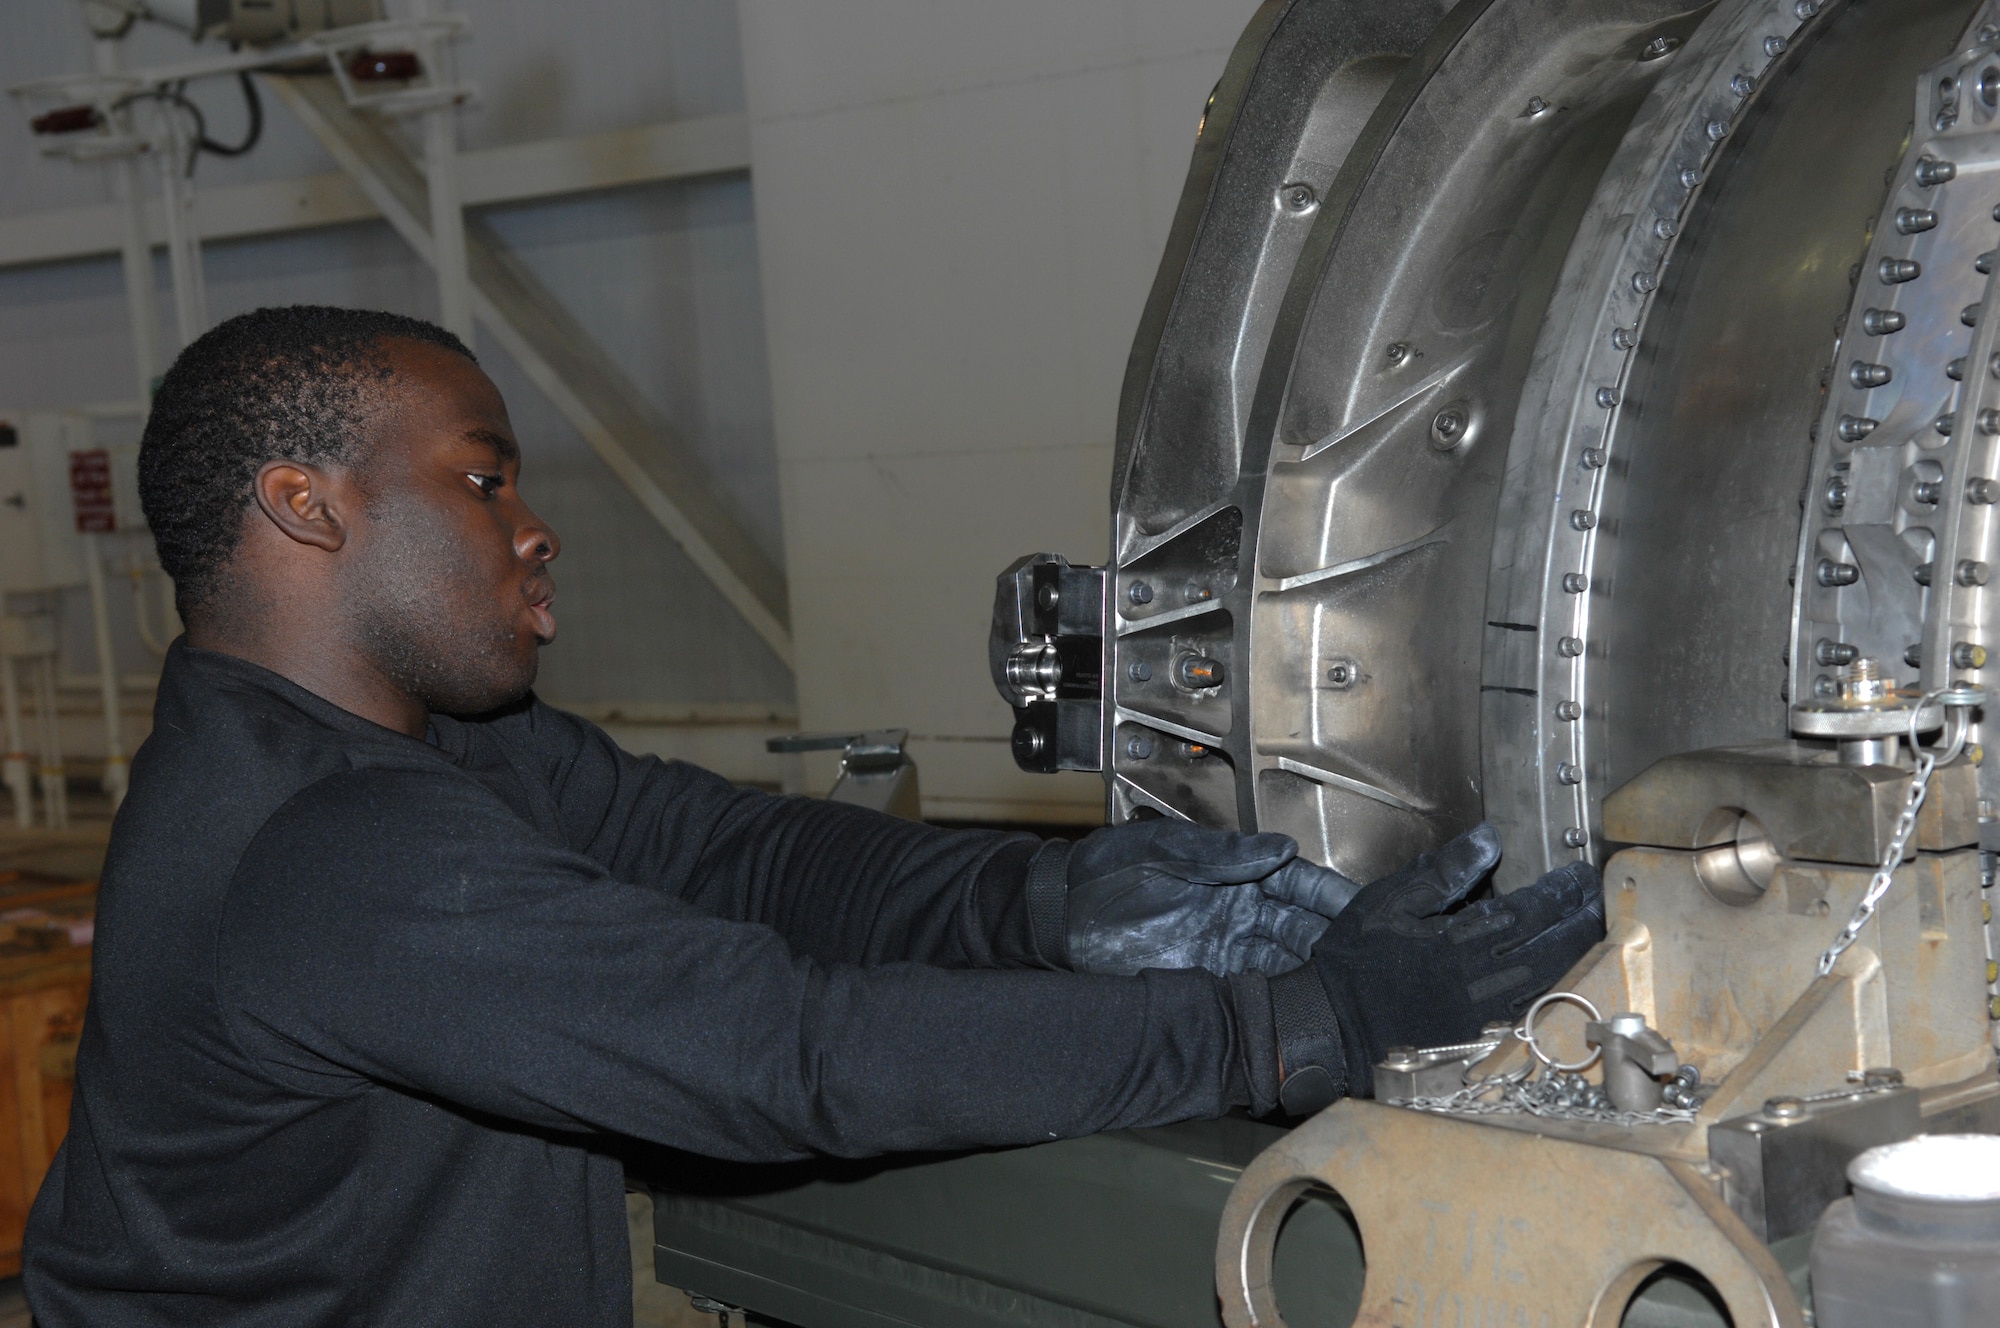 WHITEMAN AIR FORCE BASE, Mo. -- Airman Eric Prince, 509th Aircraft Maintenance Squadron, works to connect the forward tell pipe to the GE-F118 engine in preparation for installation Oct. 24. (U.S. Air Force photo/Airman 1st Class Stephen Linch)